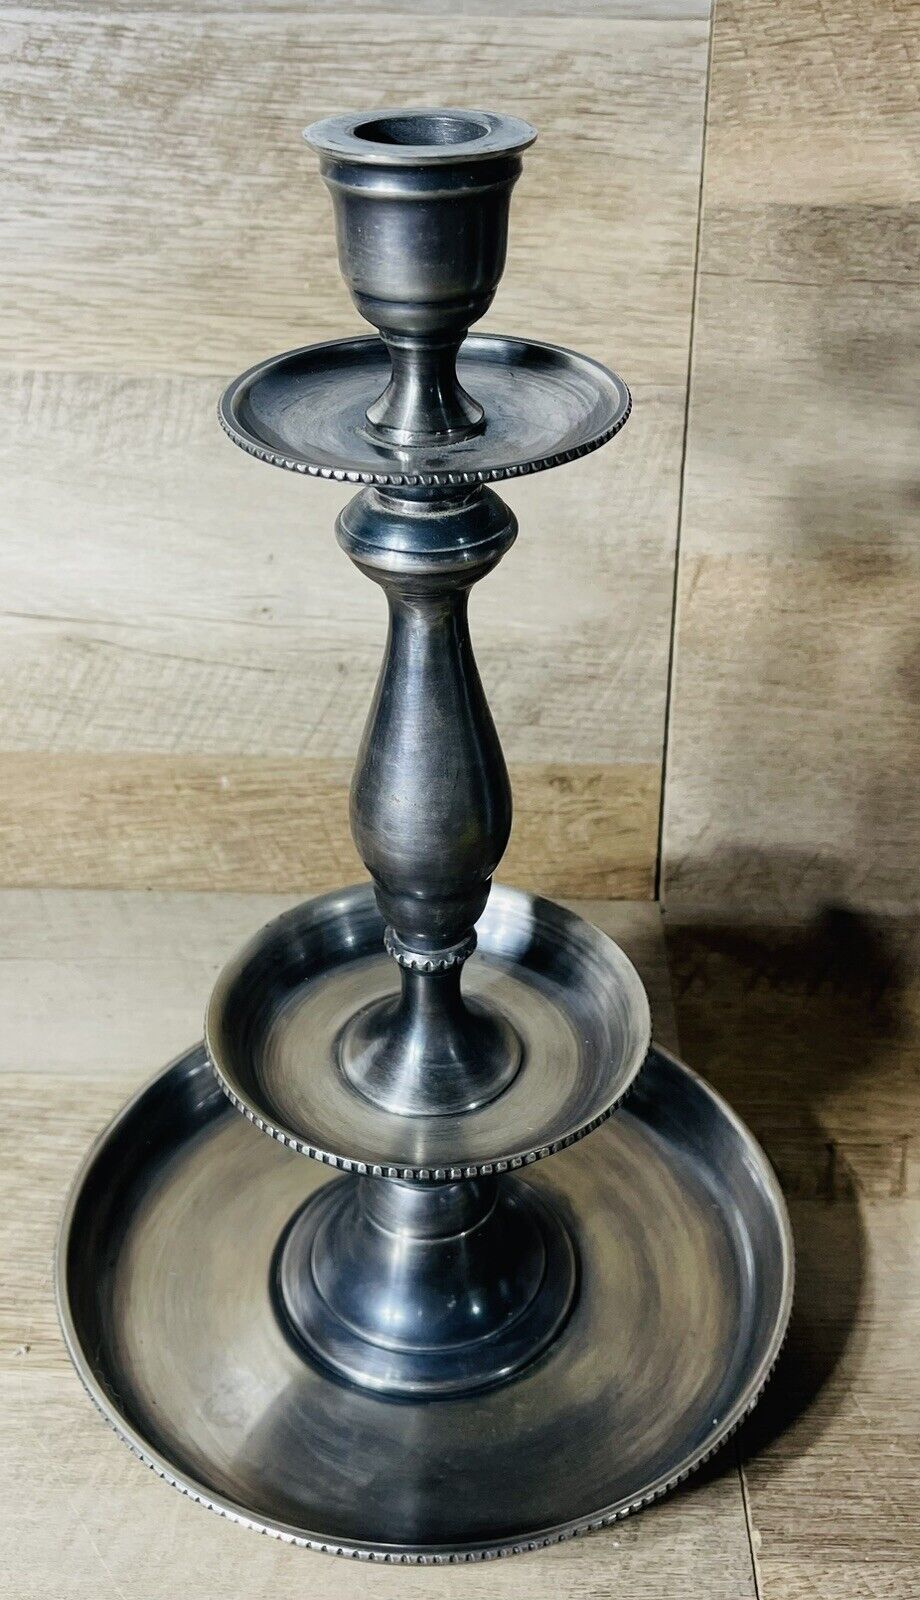 August Haven Peititfour French Style Candlestick 12” Tall Silver Tone